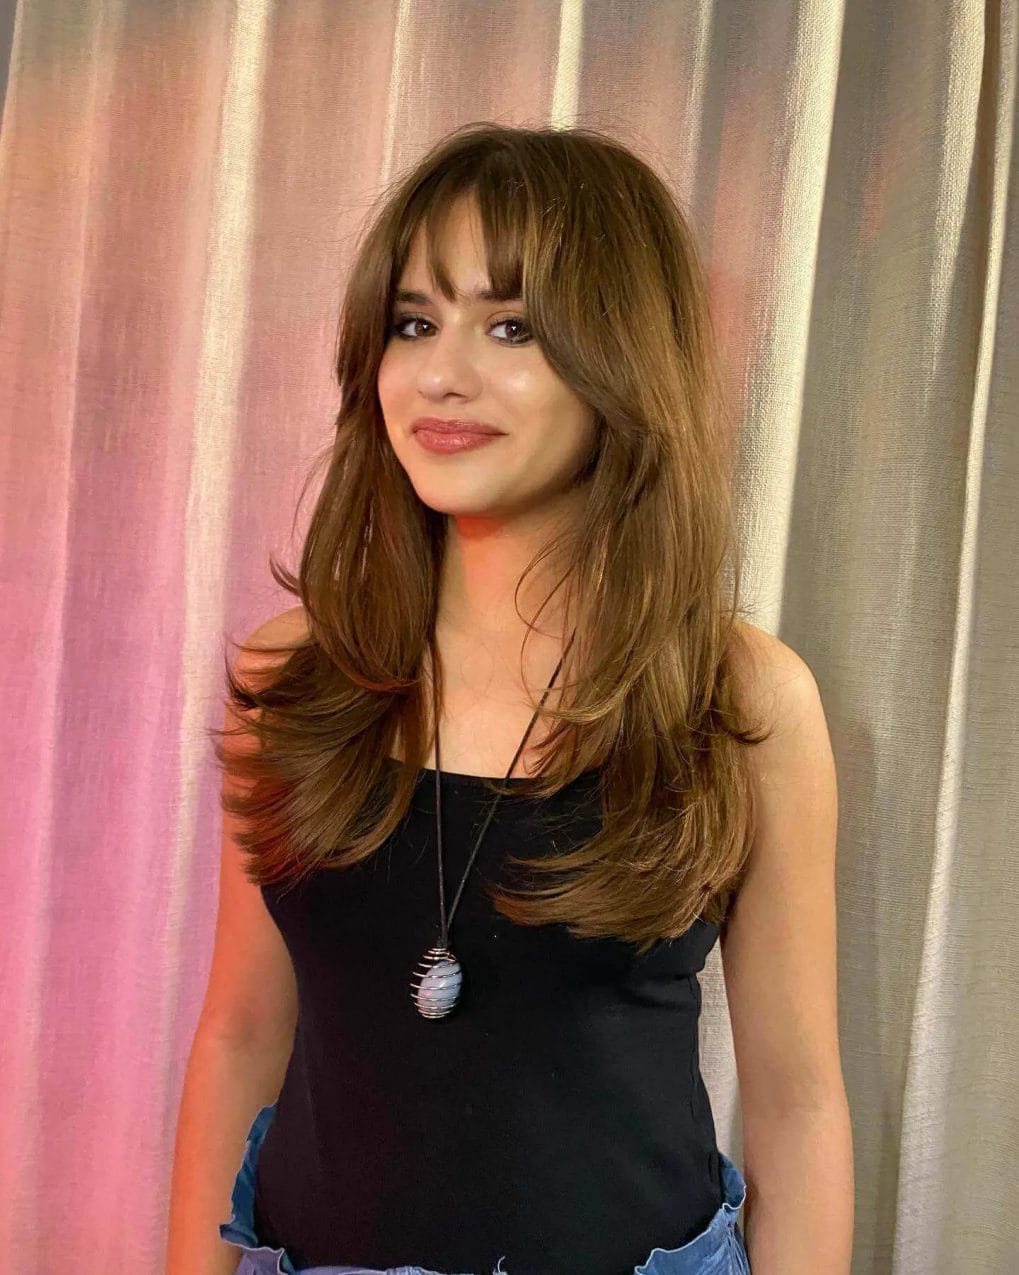 Smooth chestnut blowout with wispy modern bangs great for round faces.